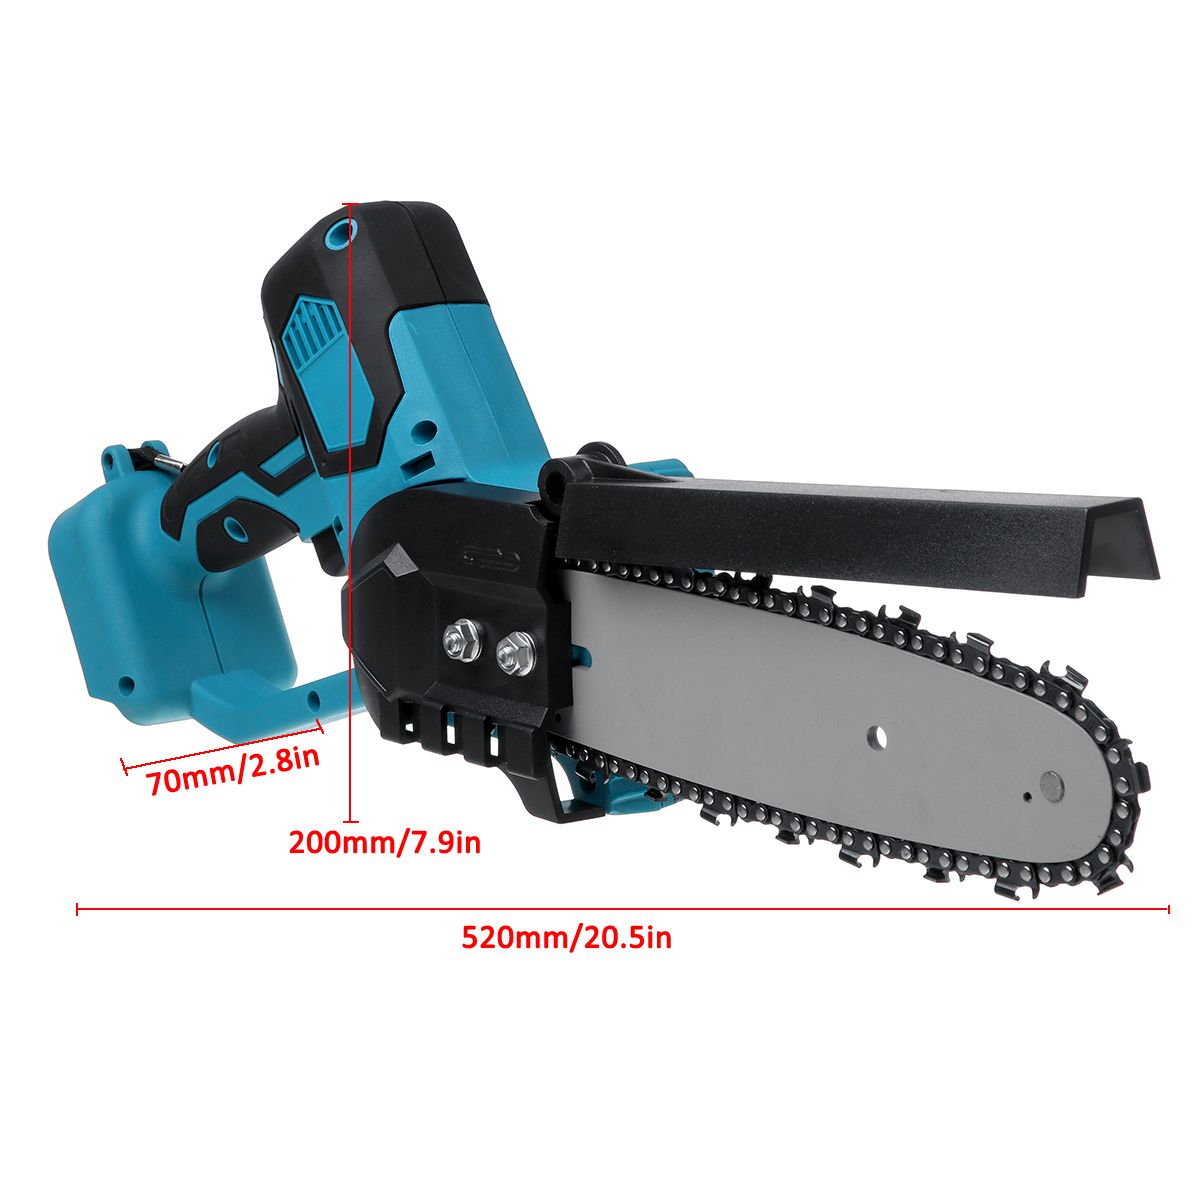 Portable-Cordless-Electric-Chain-Saw-8-Inch-Chainsaw-Woodworking-Power-Tool-For-Makita-18V-Battery-1765152